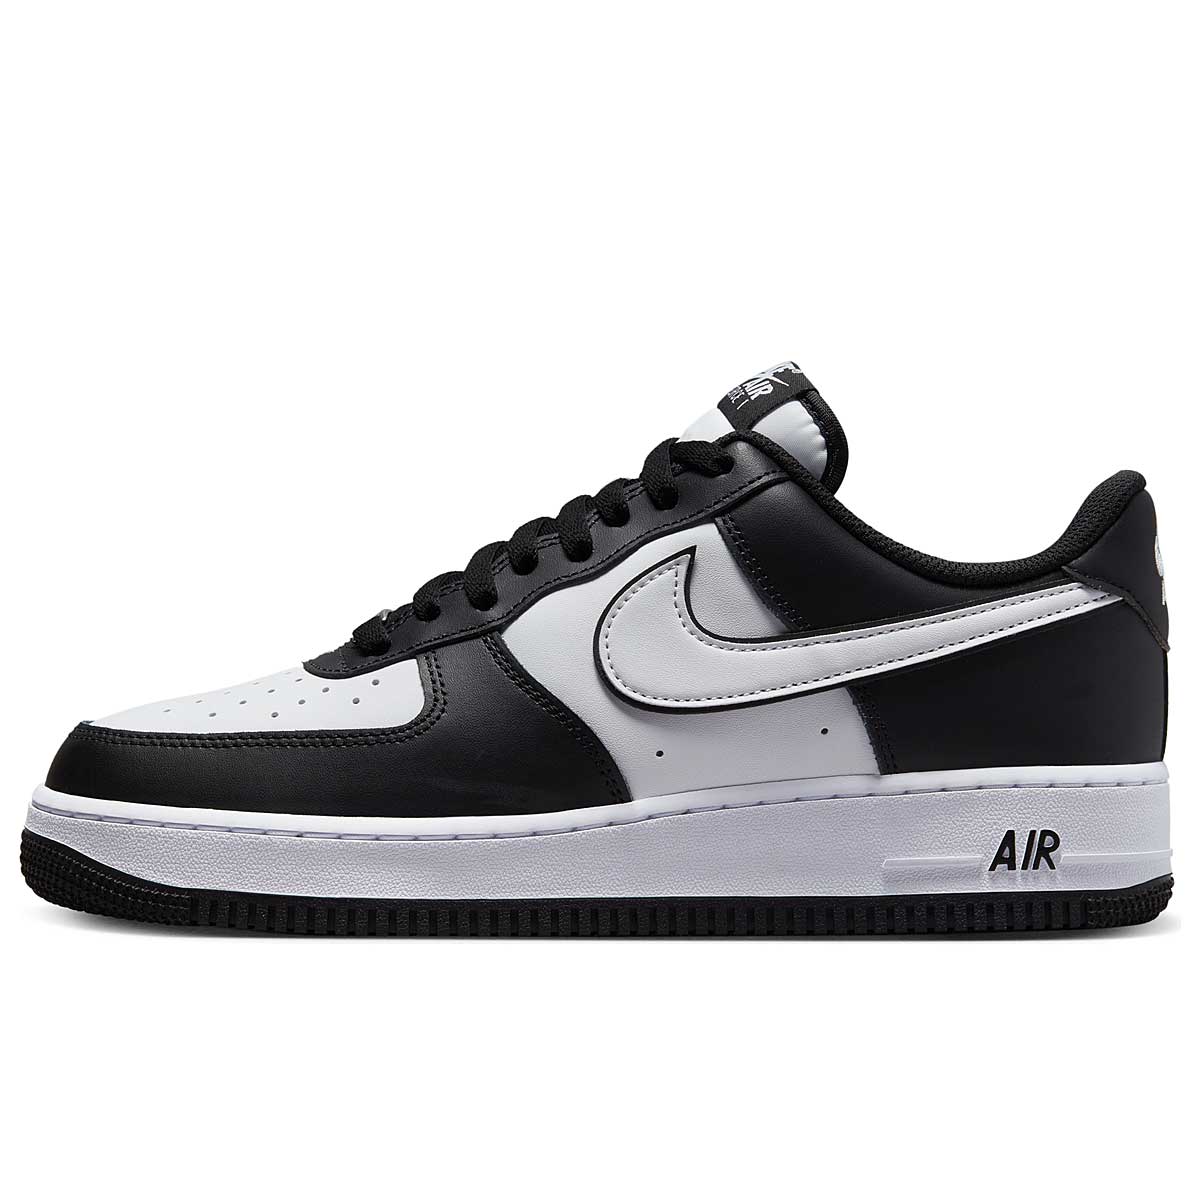 🏀 Get the Nike Air Force 1 07 in black&white | KICKZ